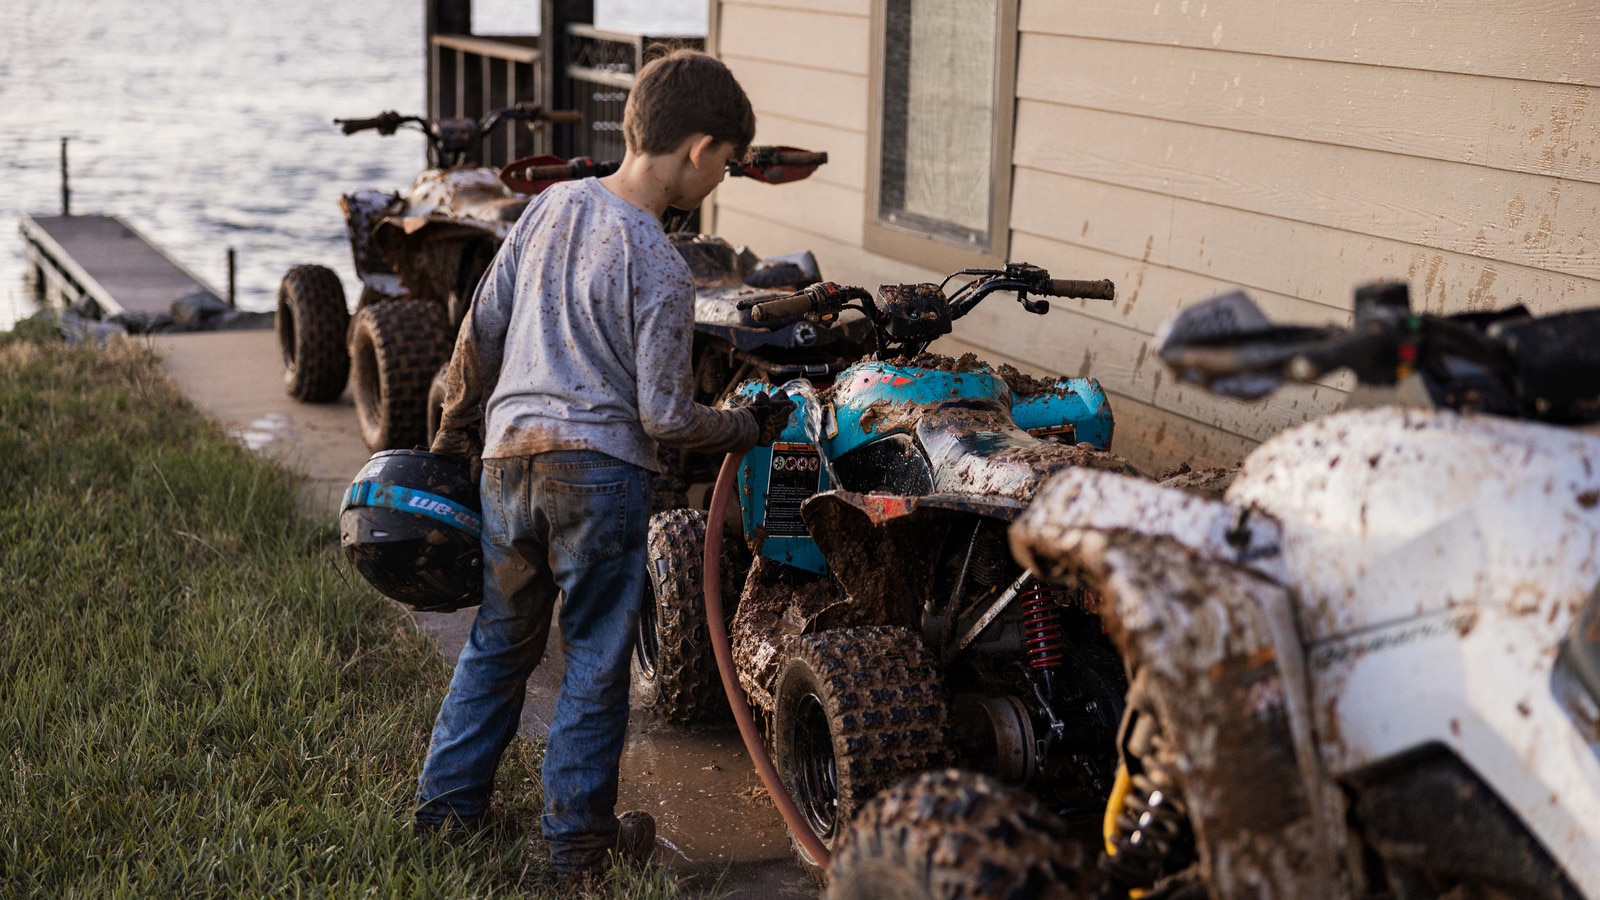 Young boy and muddy ATVs